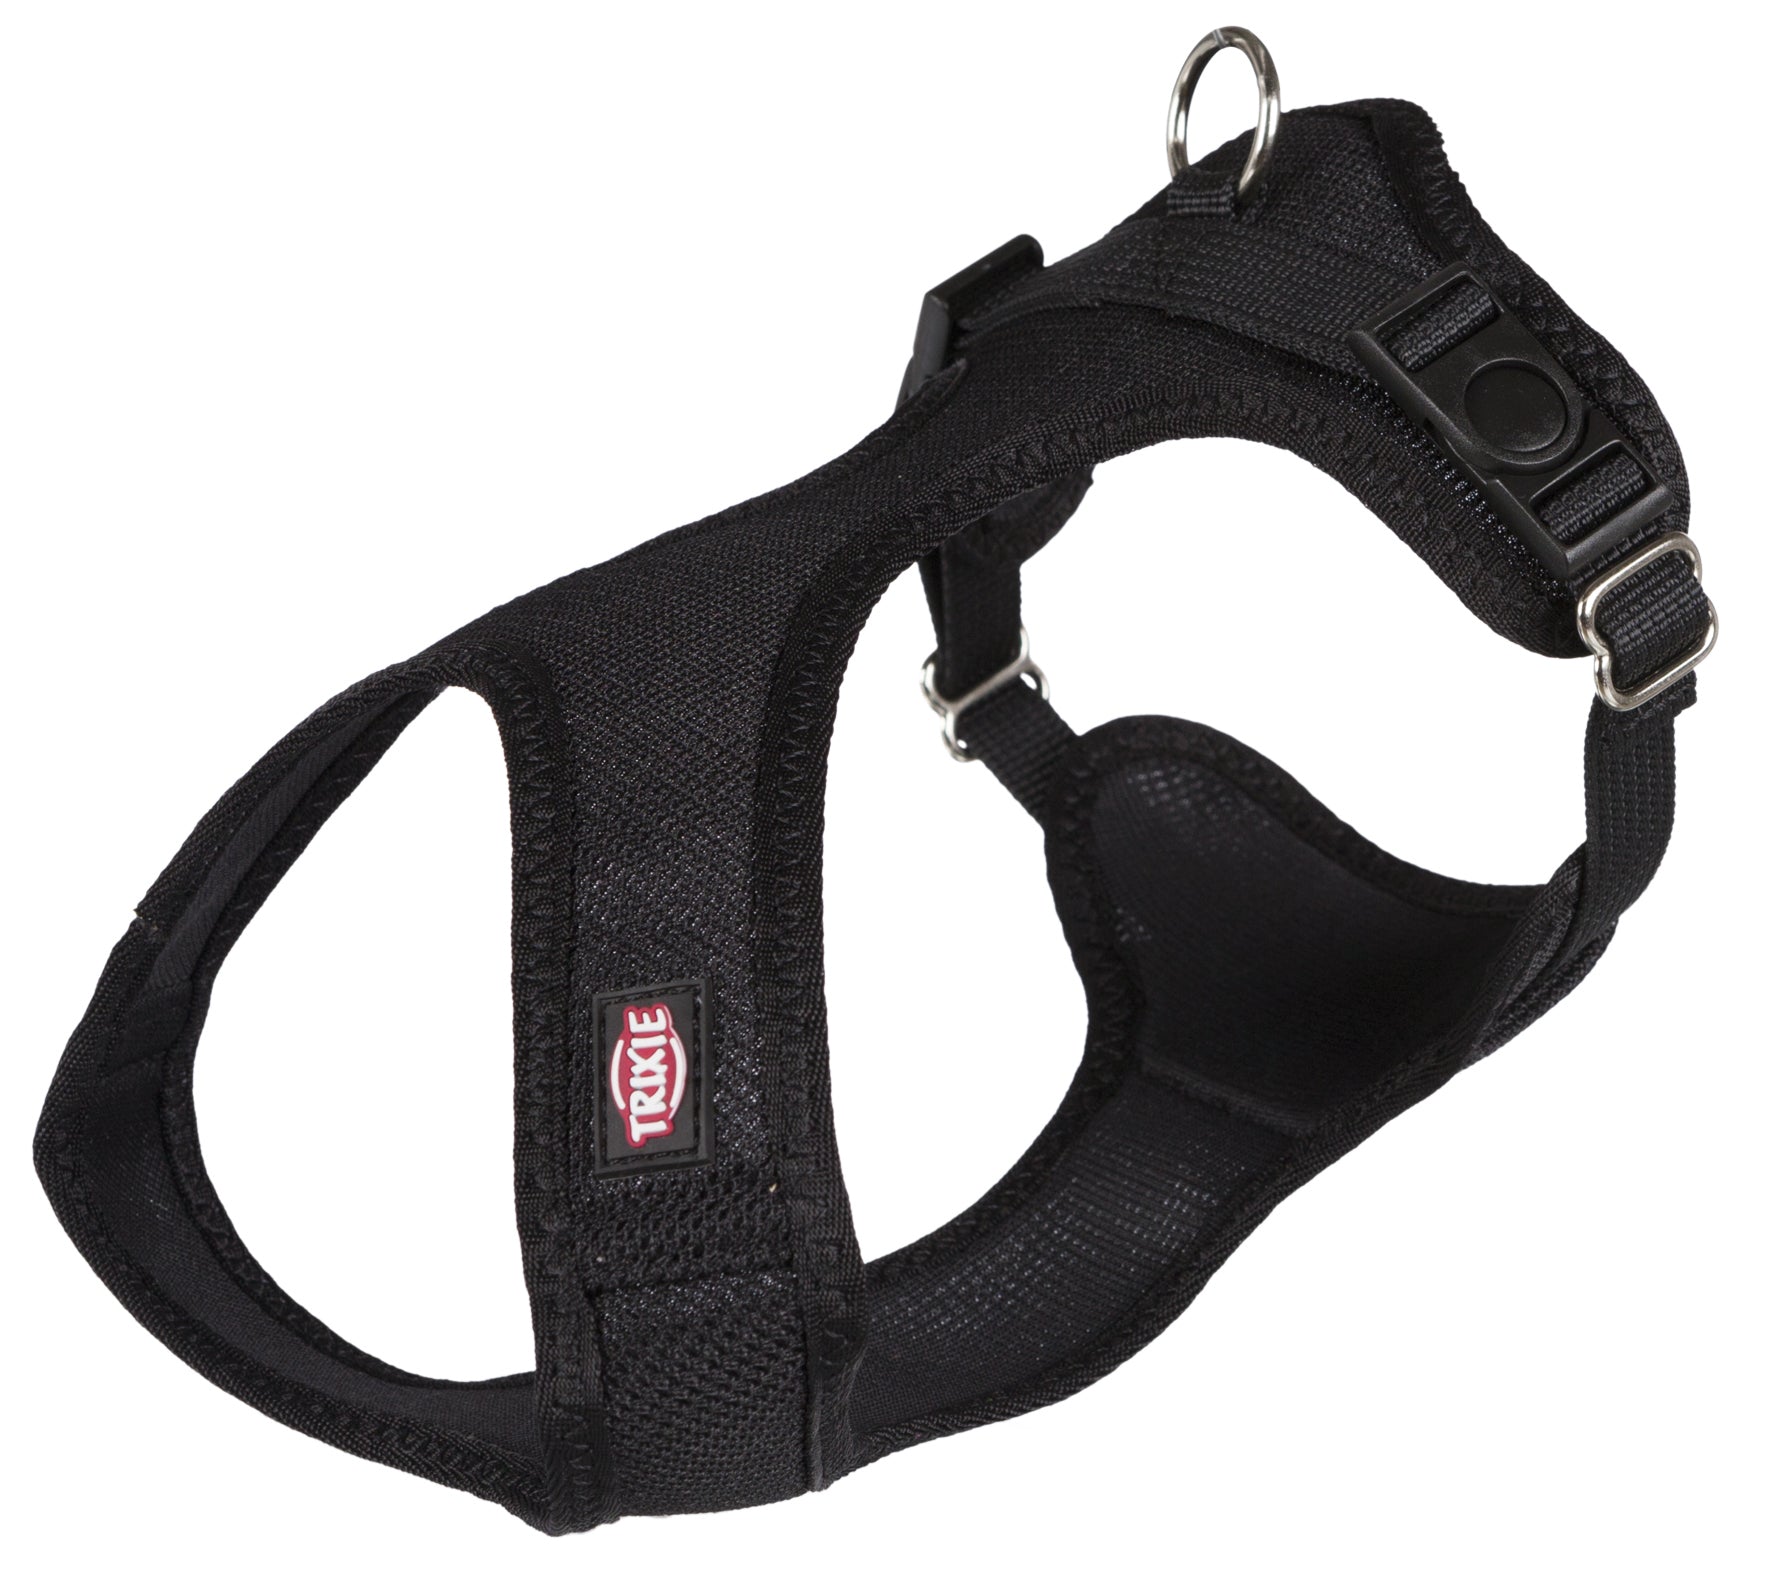 Trixie Comfort Soft Touring Harness - Black